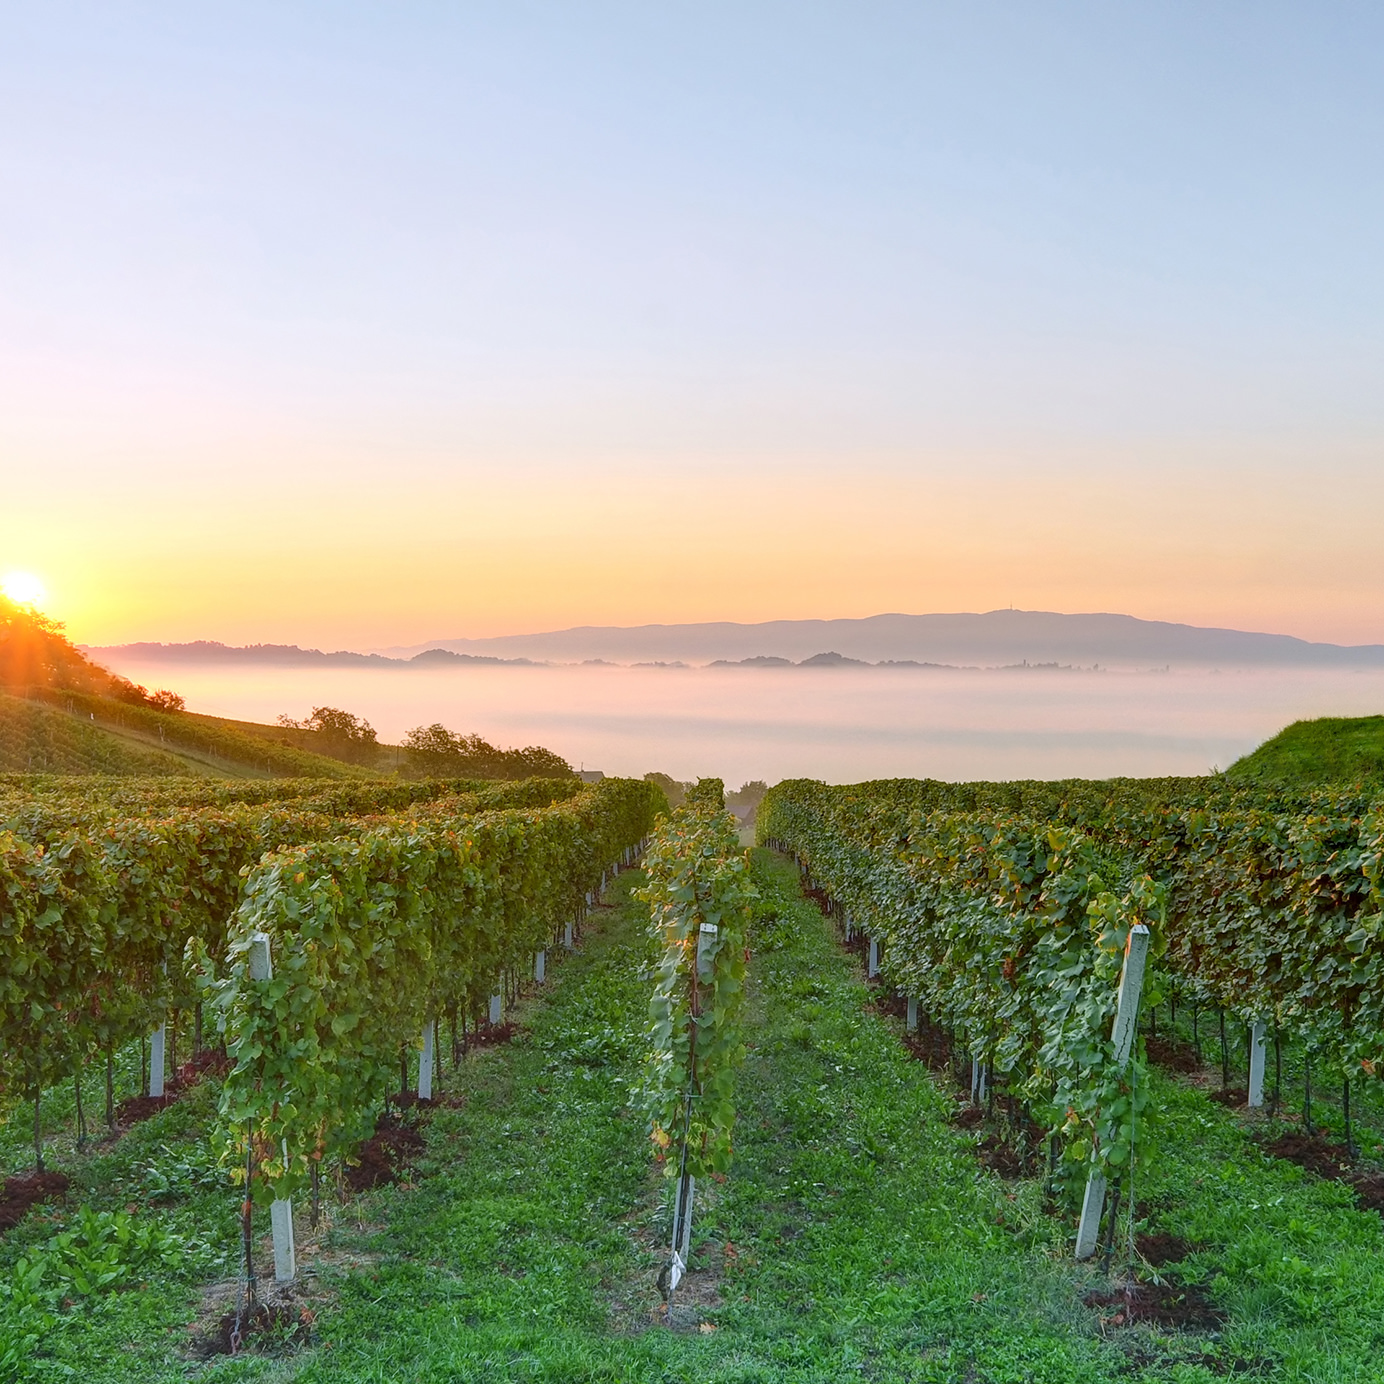 You Can Find Some of the Best Sparkling Wines You’ve Never Tasted in Slovenia